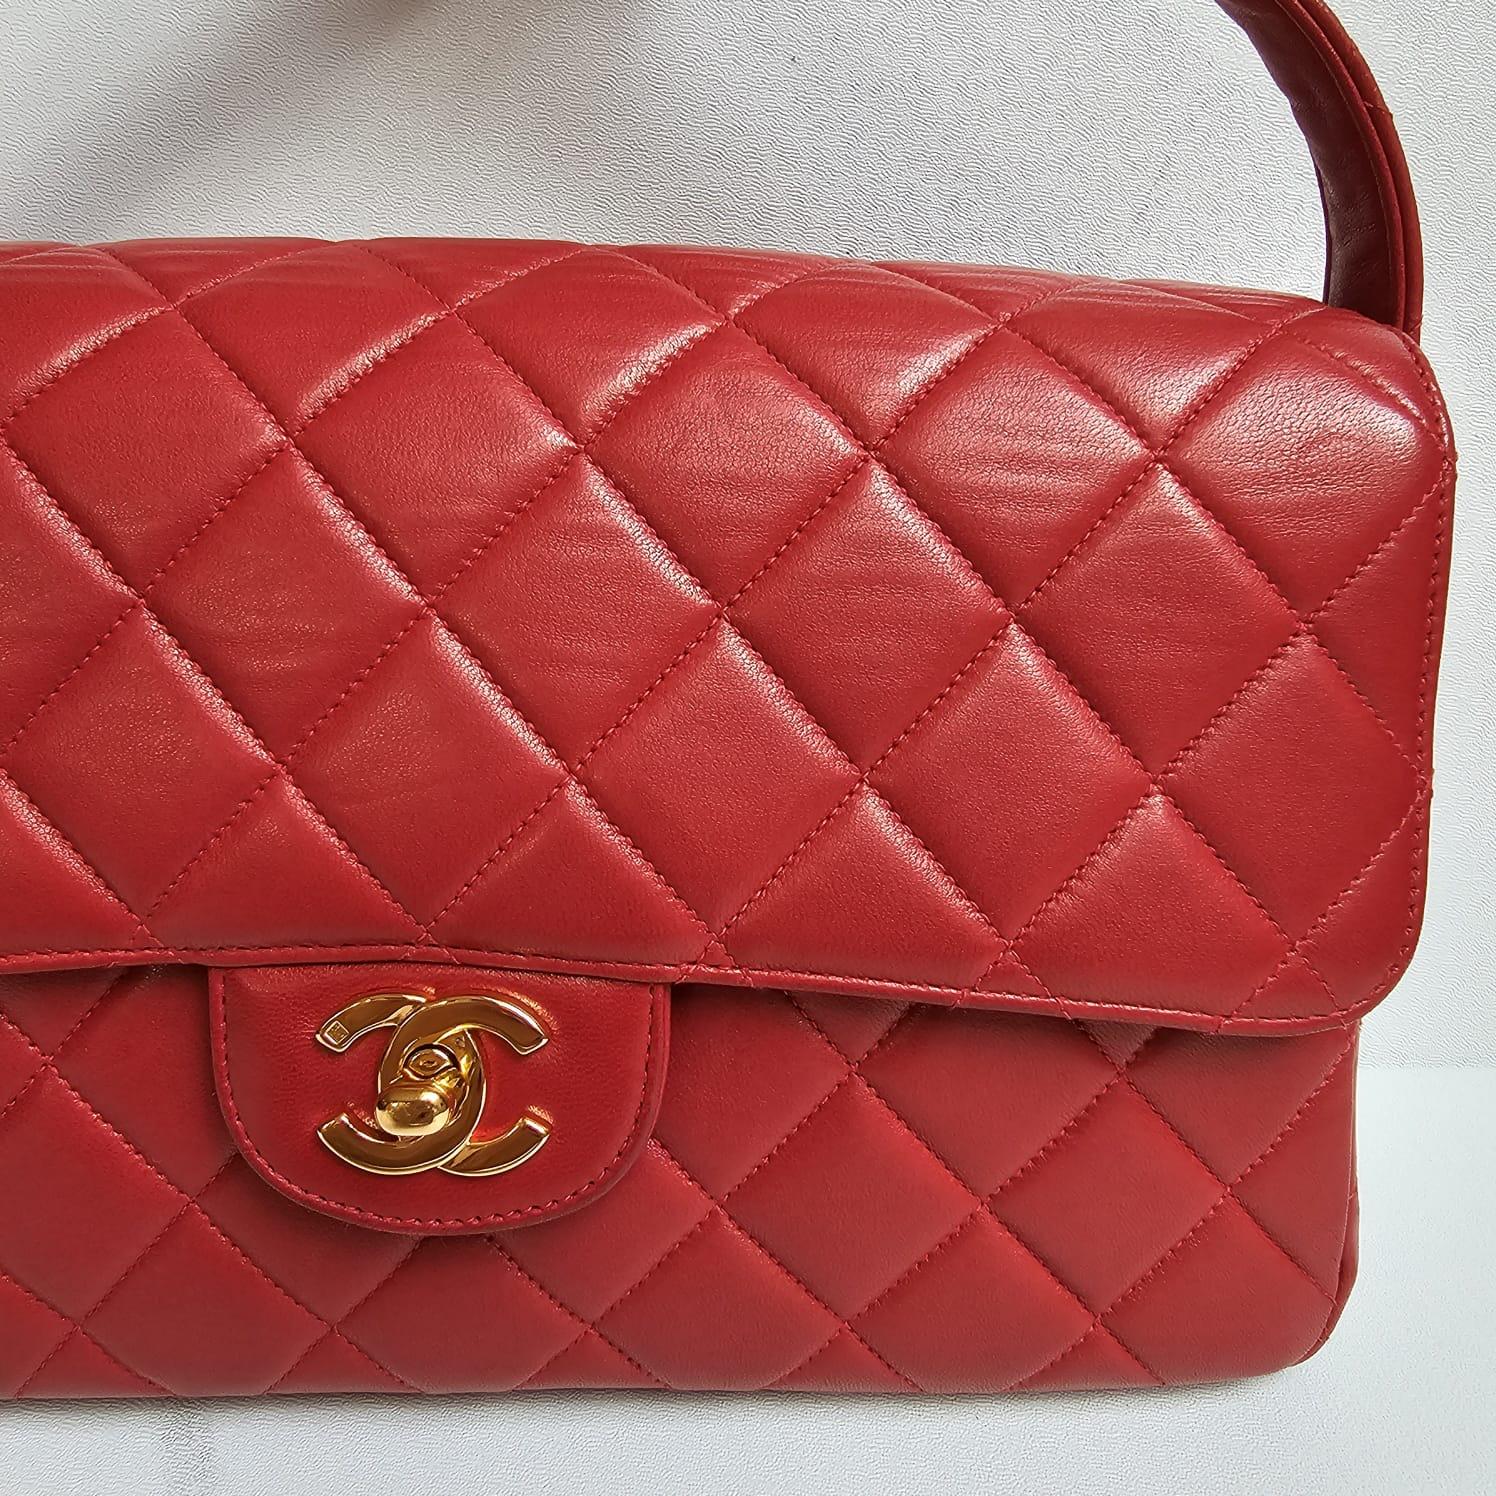 Chanel Vintage Red Lambskin Medium Quilted Double Face Top Handle Bag For Sale 14